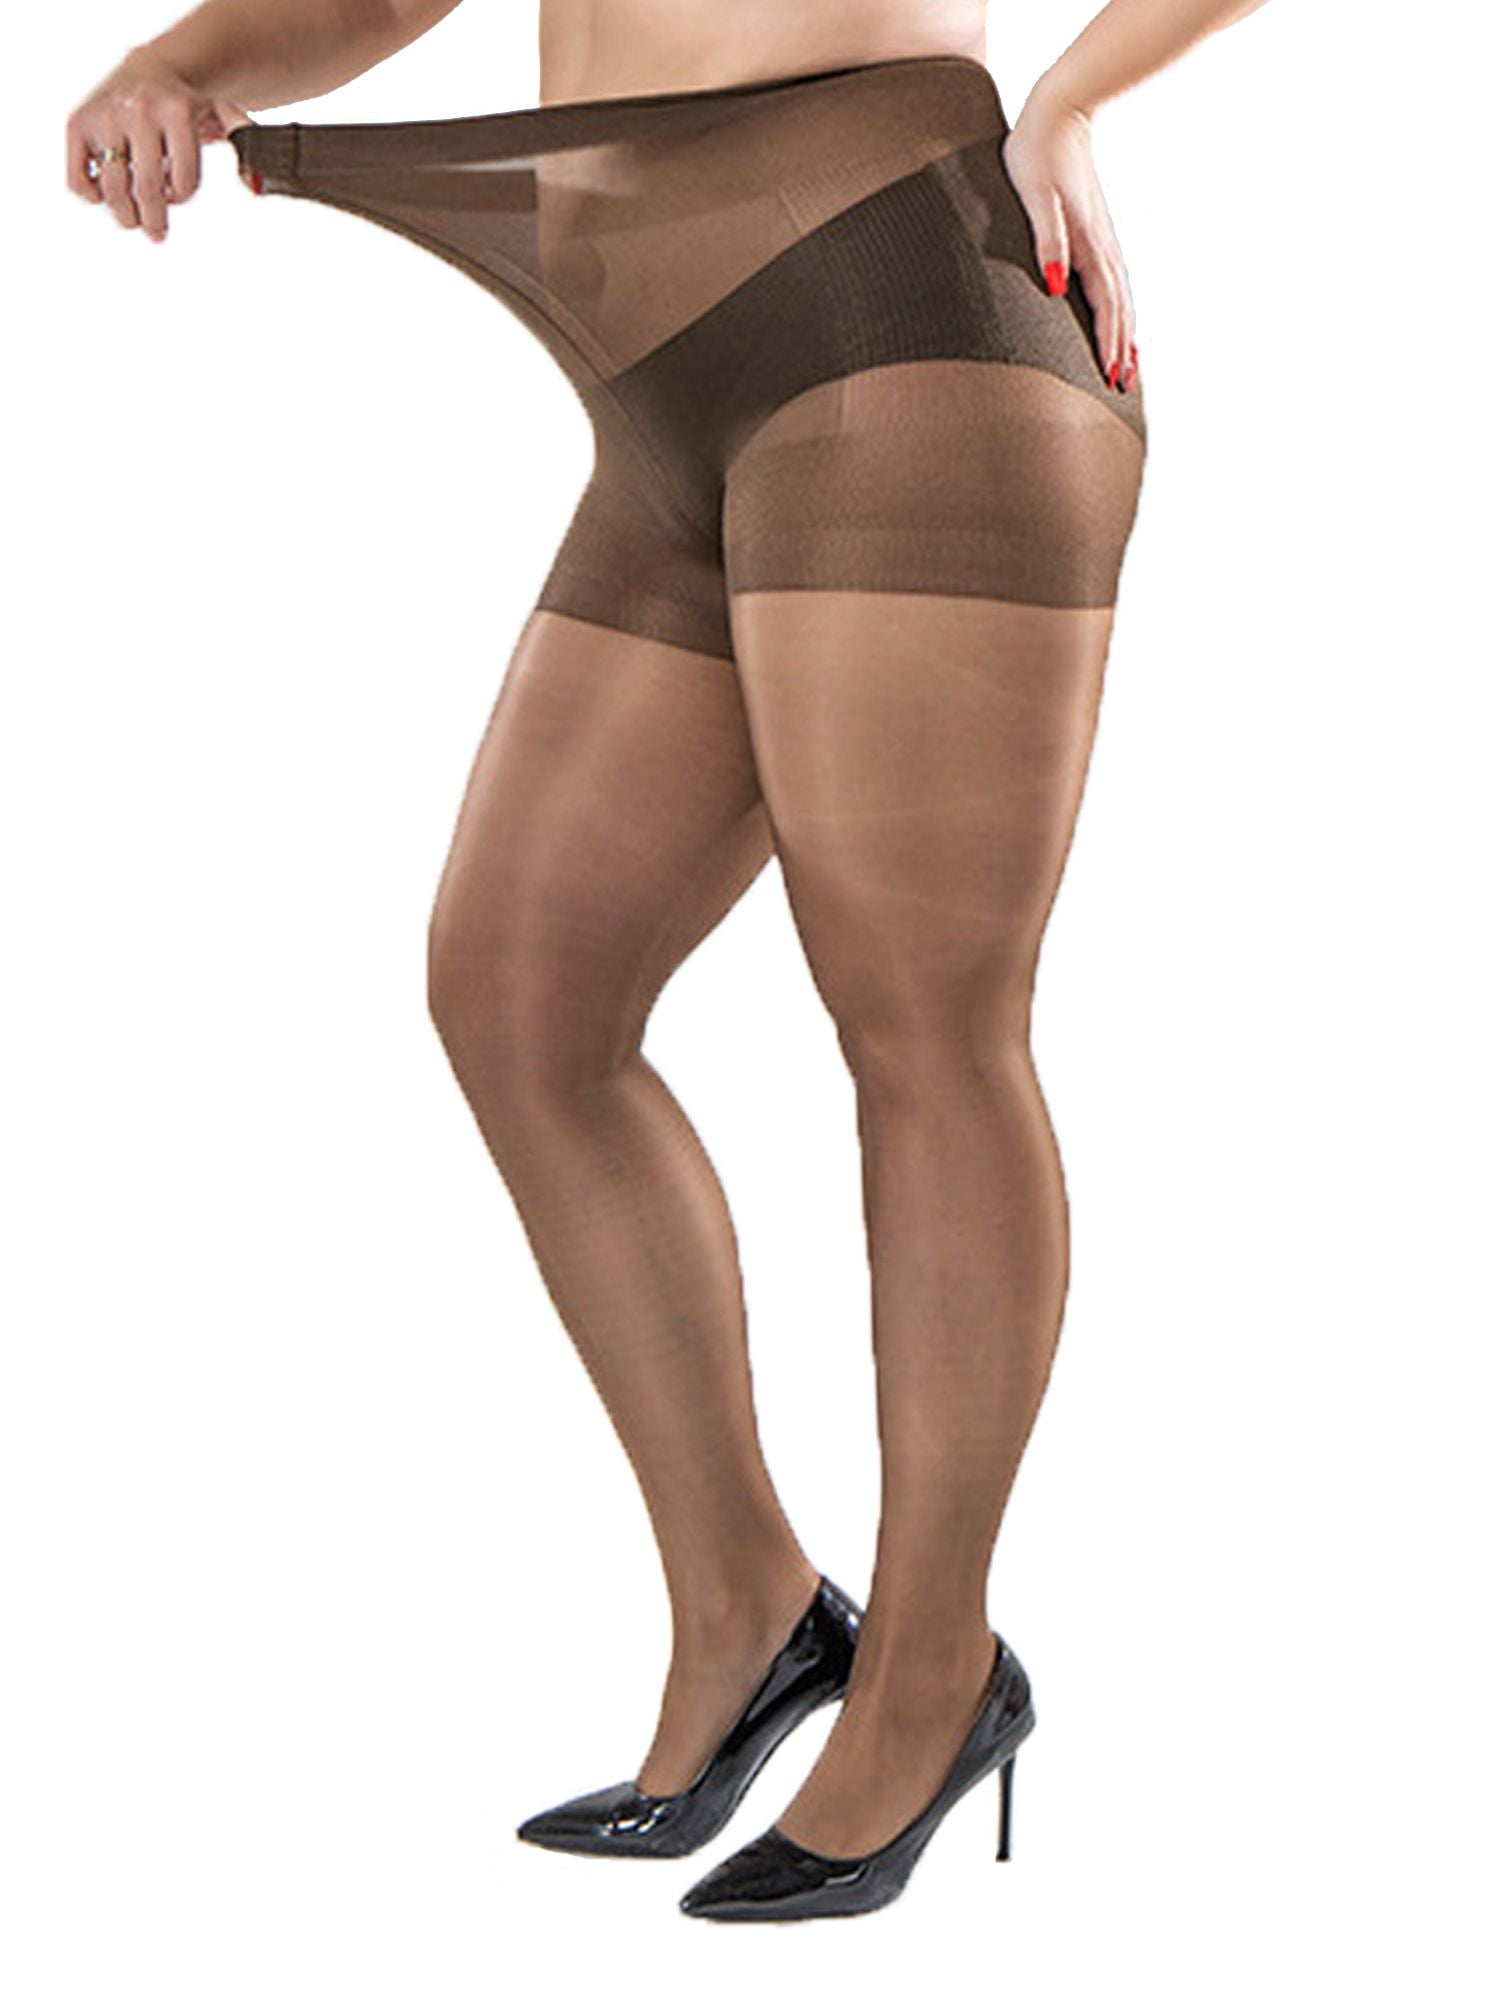 Yilanmy Plus Size Tights for Women Semi Opaque Control Top Pantyhose Queen  Size High Waist Stockings at  Women’s Clothing store